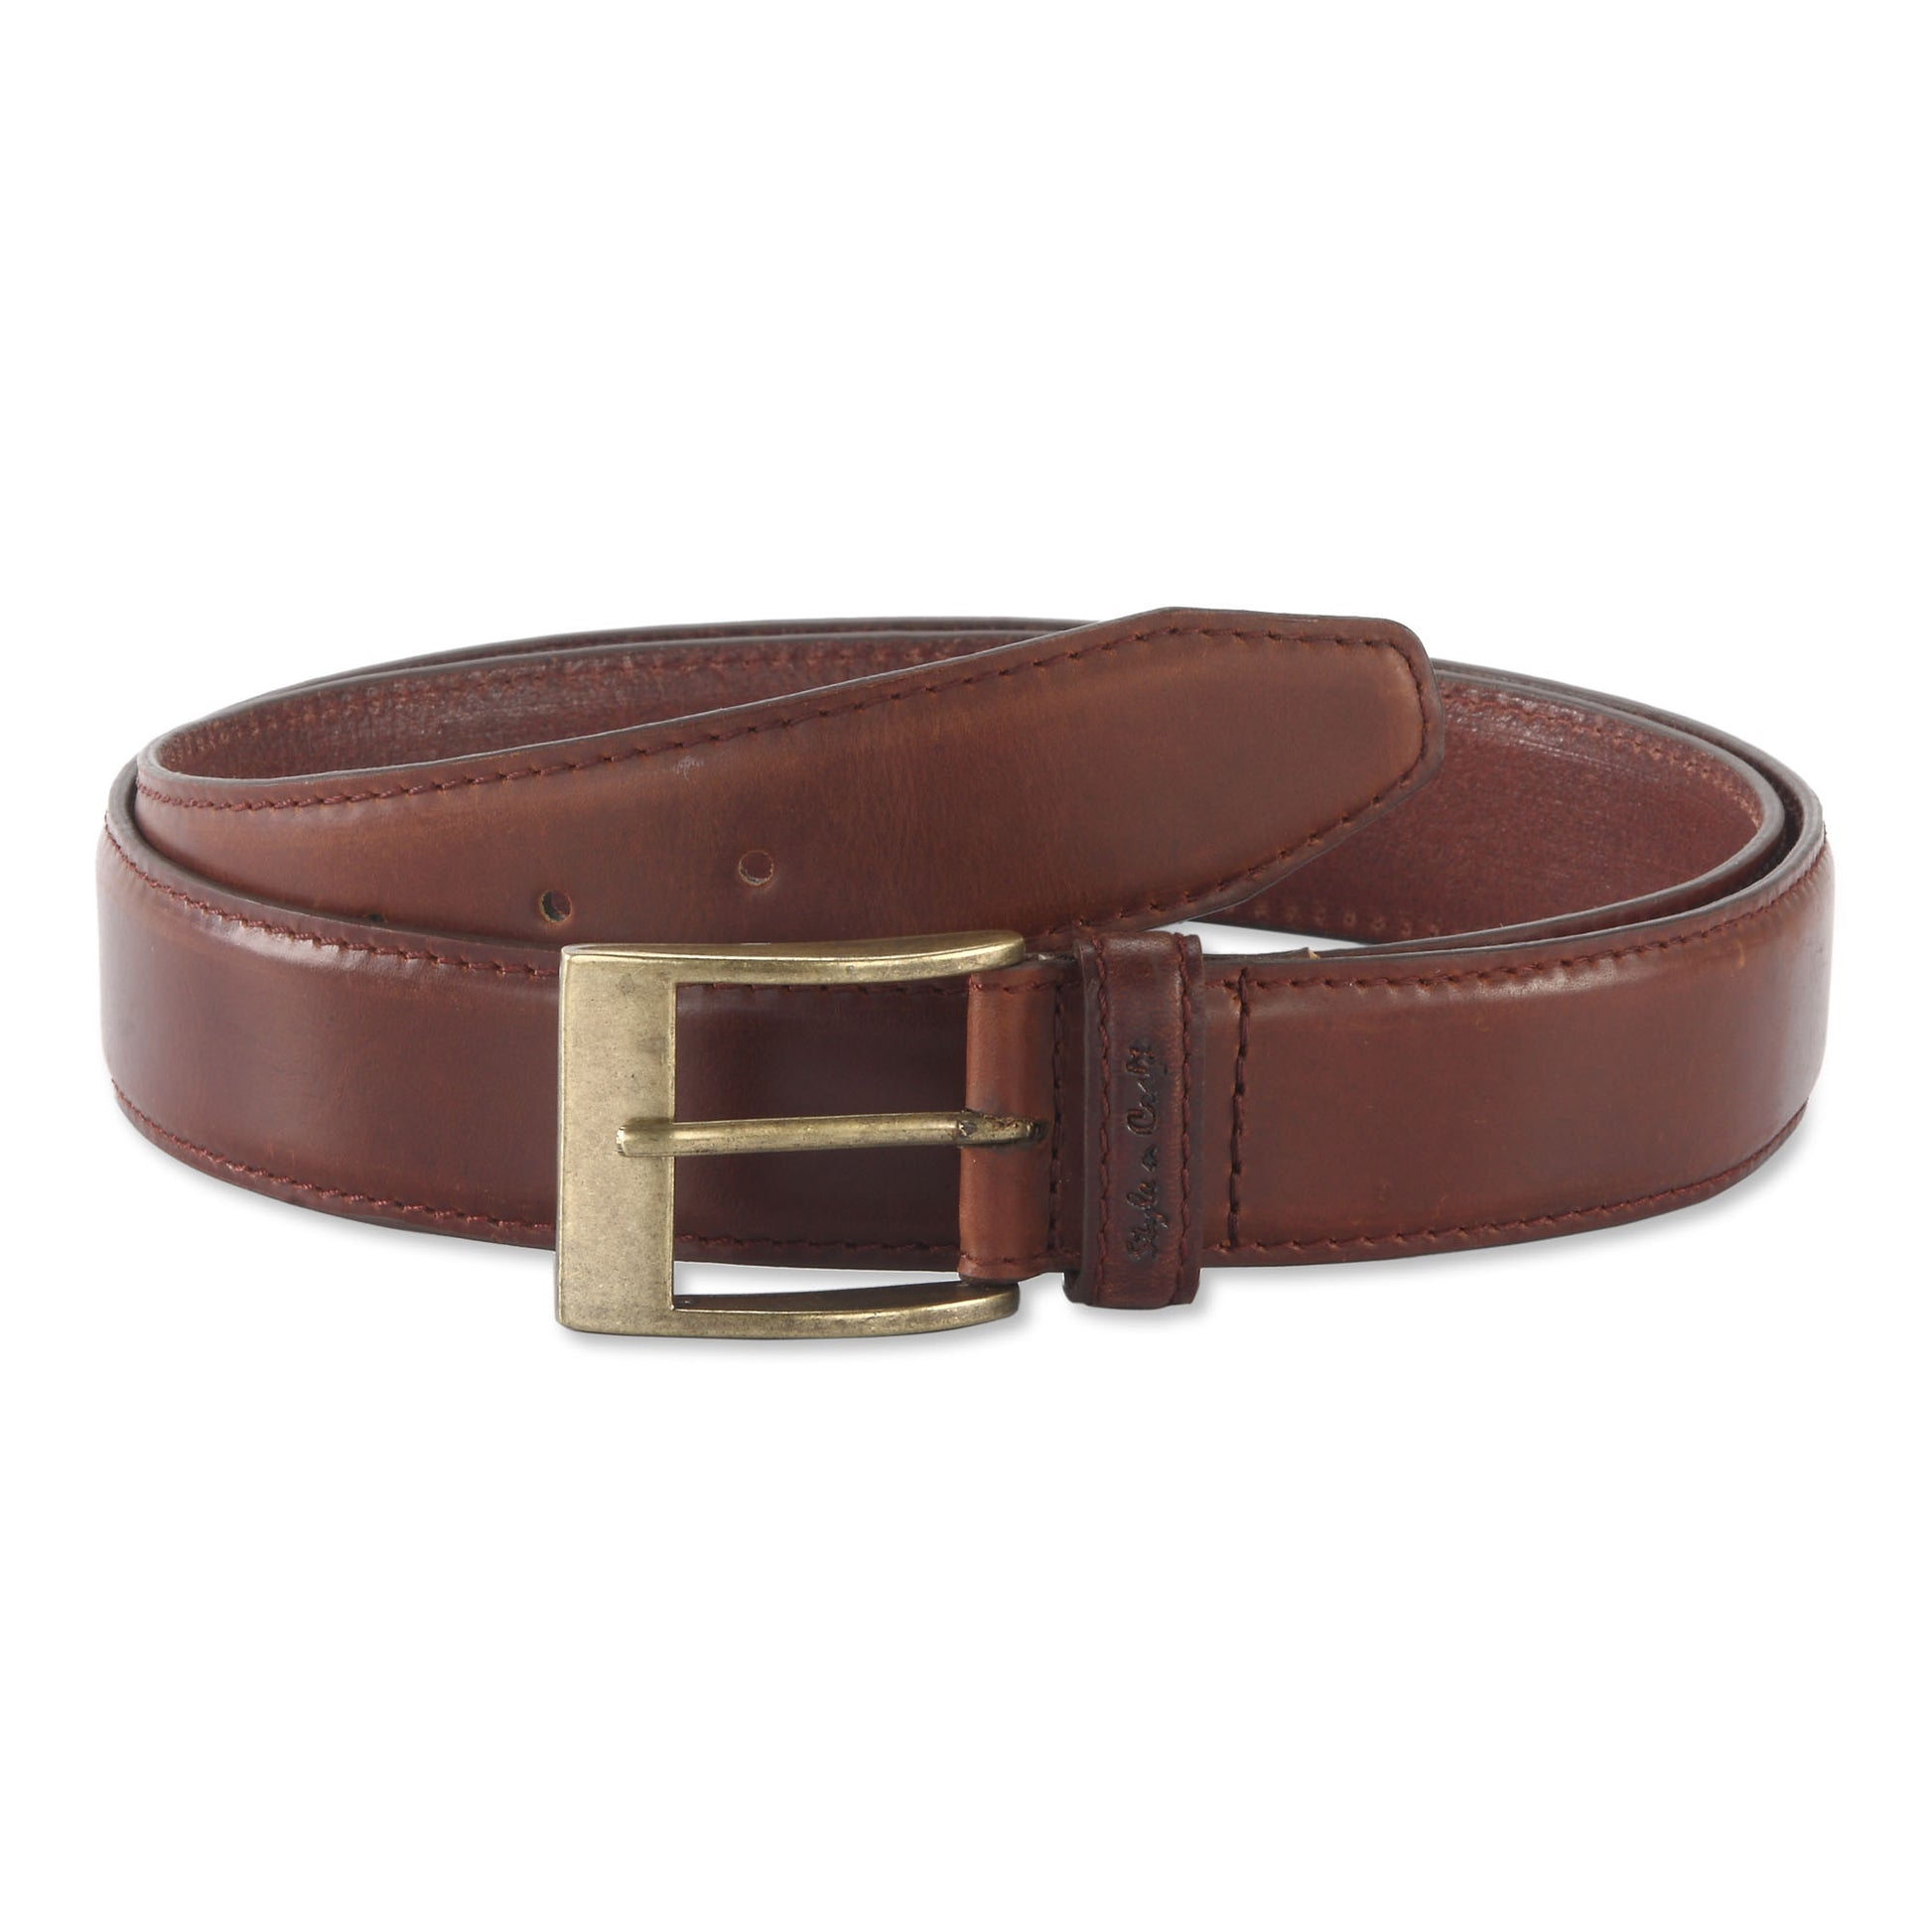 Cognac Color Leather Belt from Style n Craft | Style n Craft